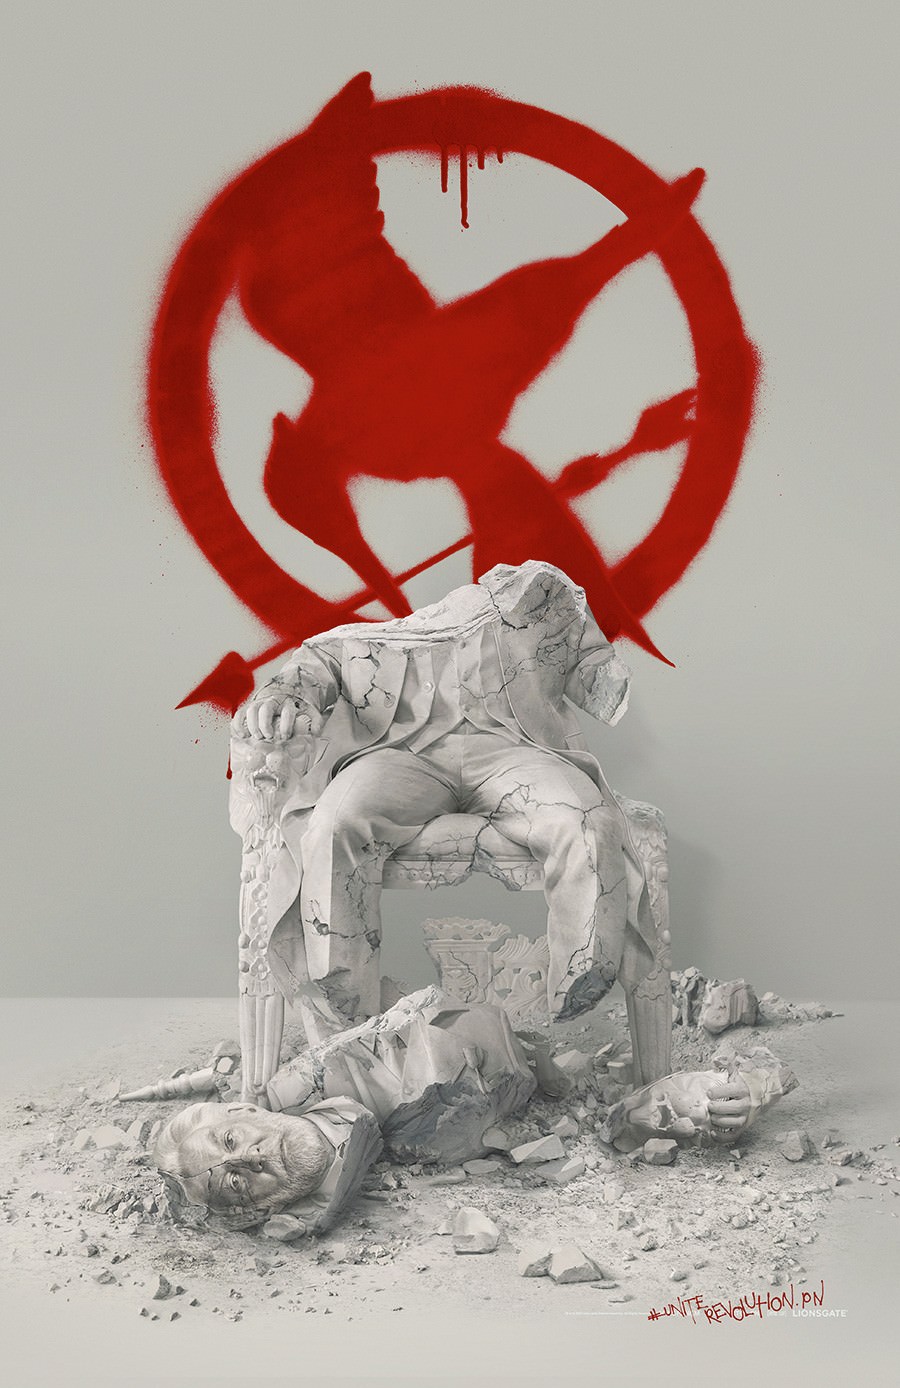 the-hunger-games-mockingjay-part-2-poster (1)